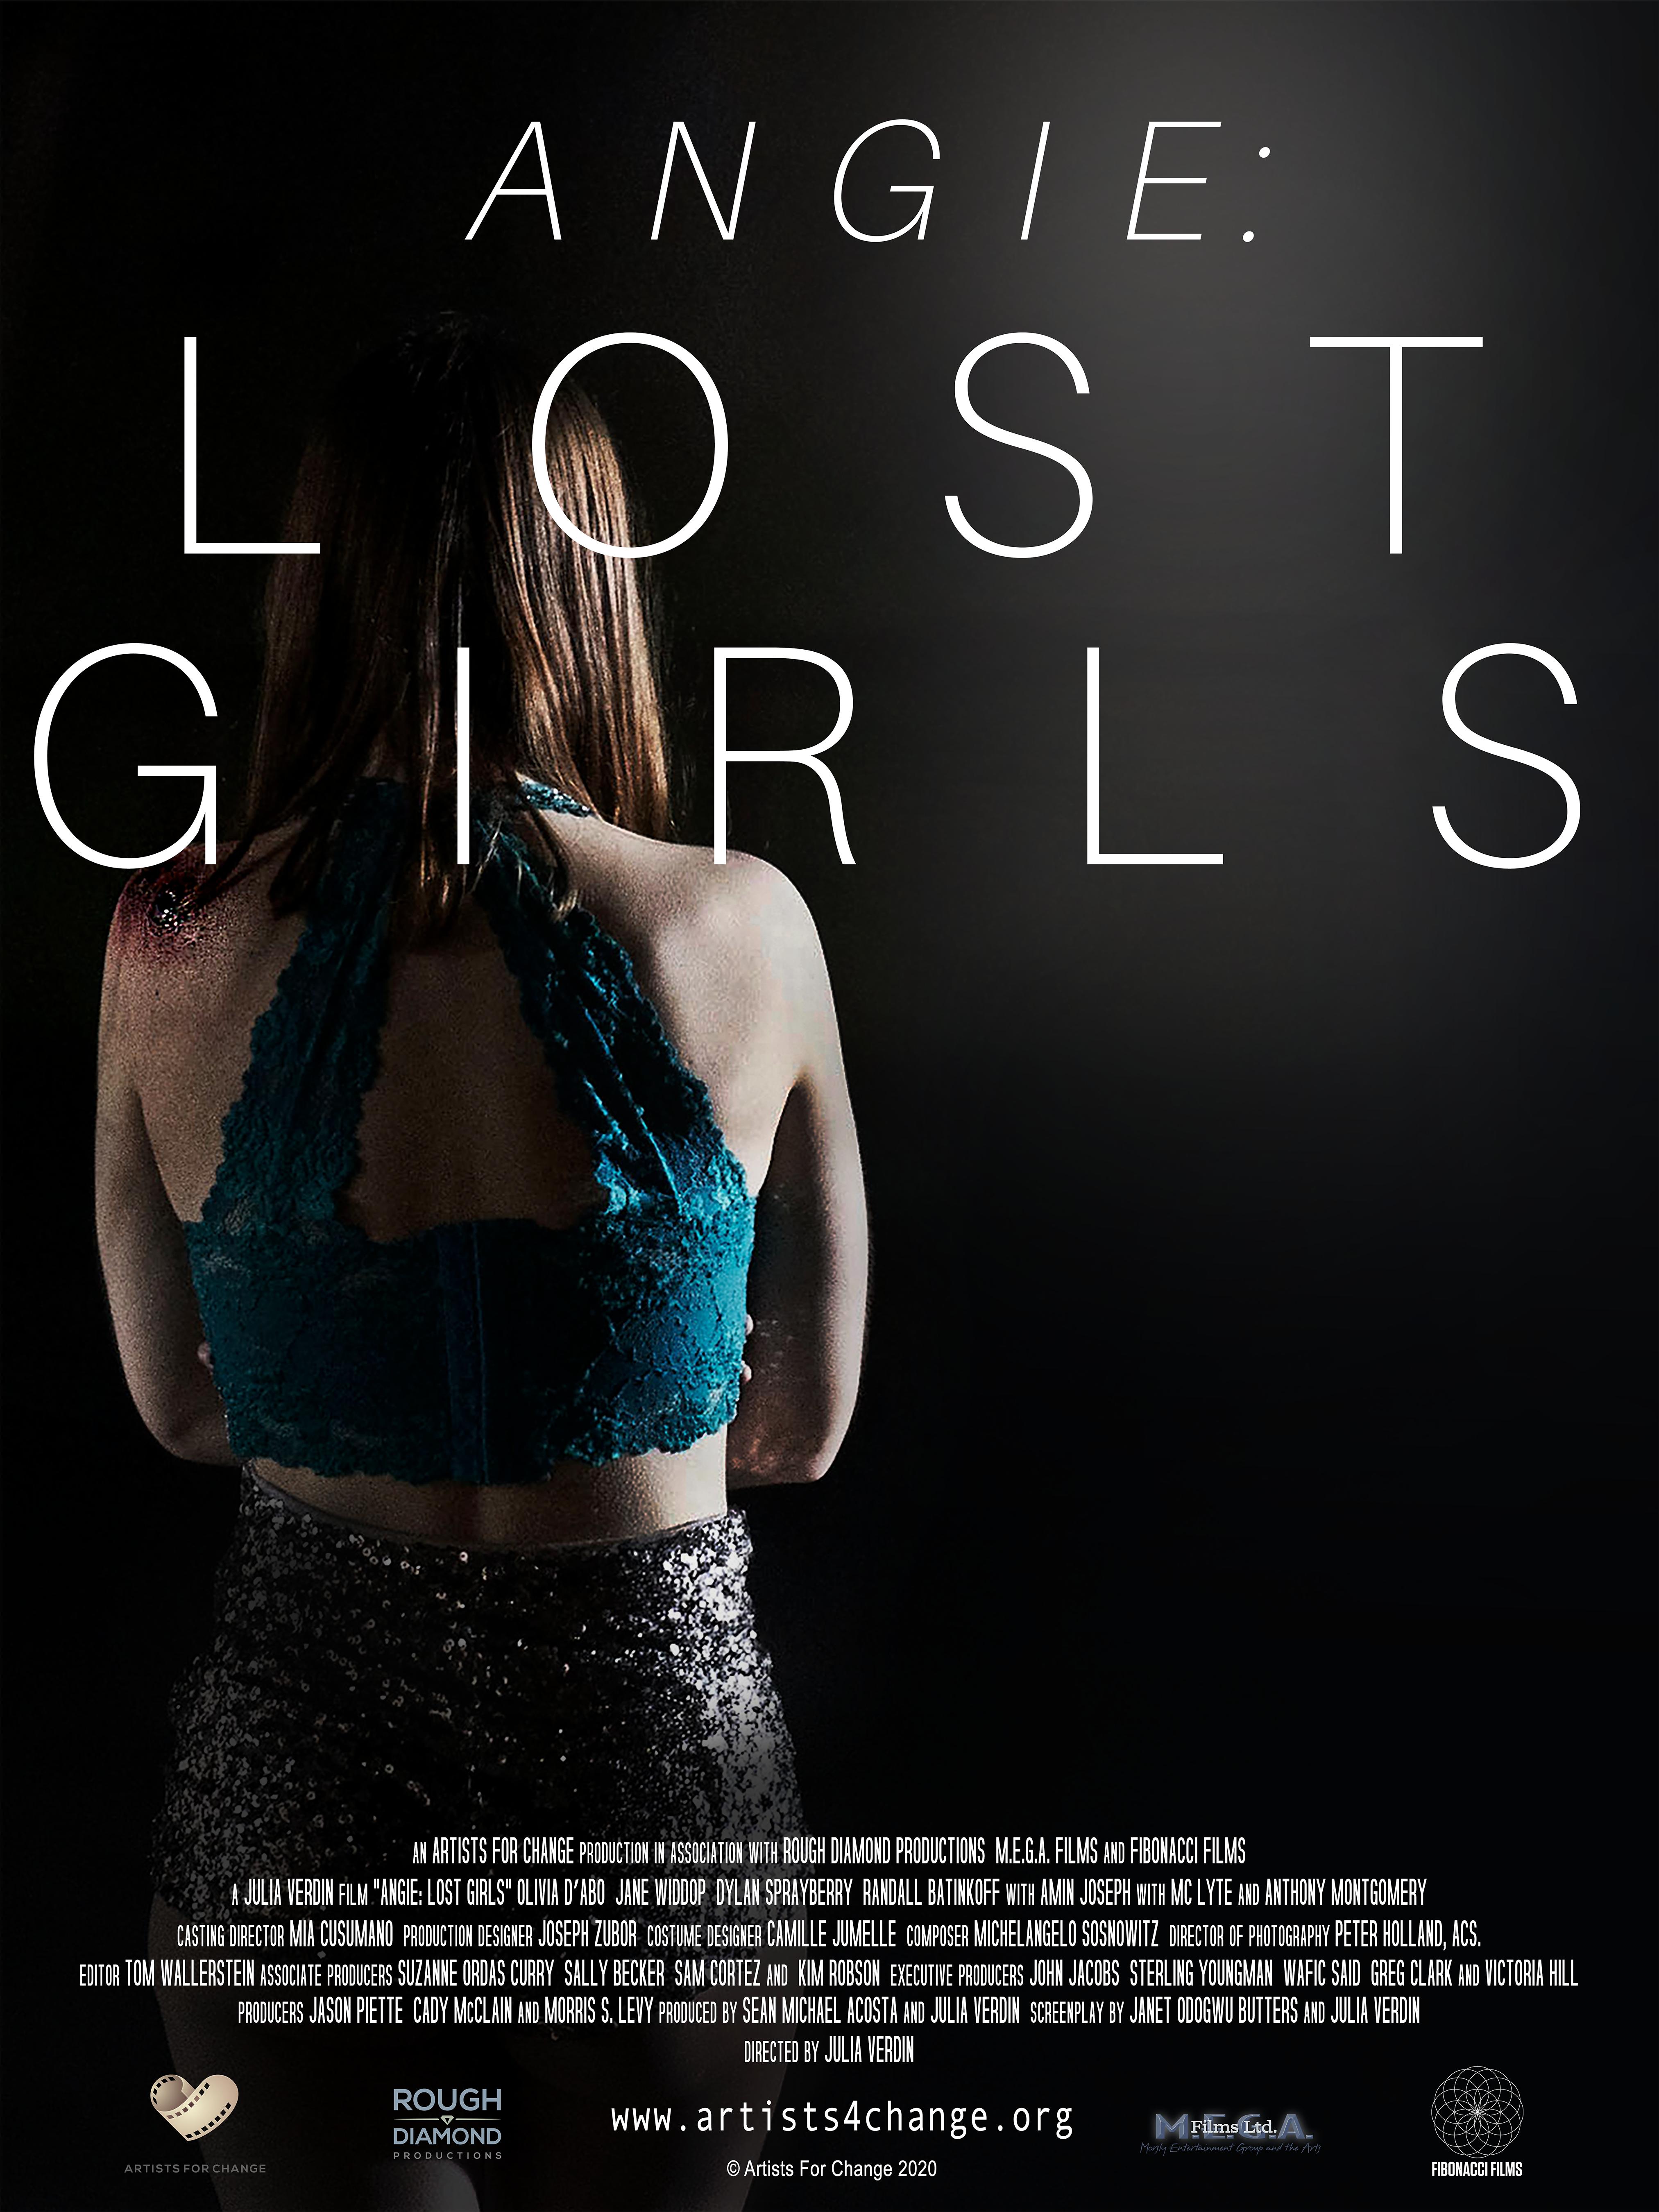 Angie: Lost Girls (2020)